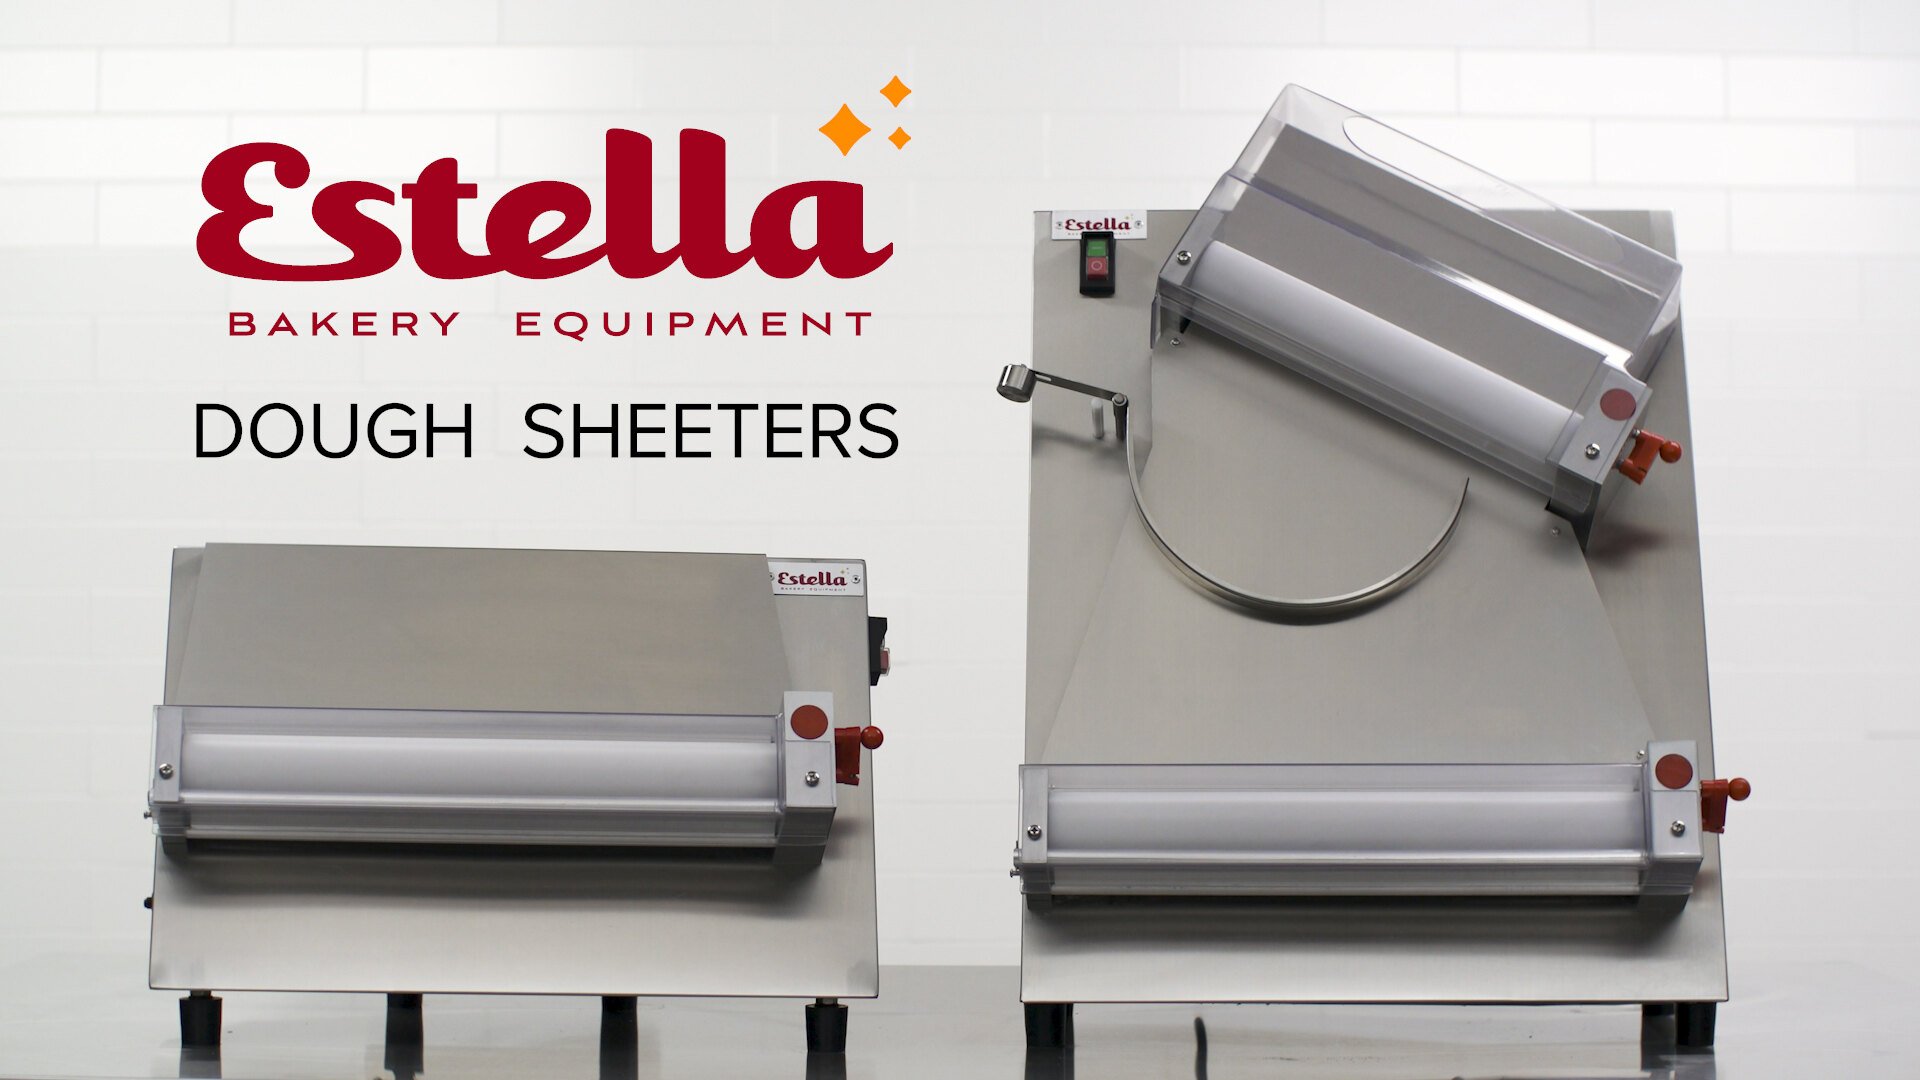 Estella EDS18D 18 Countertop Two Stage Dough Sheeter - 120V, 1/2 HP